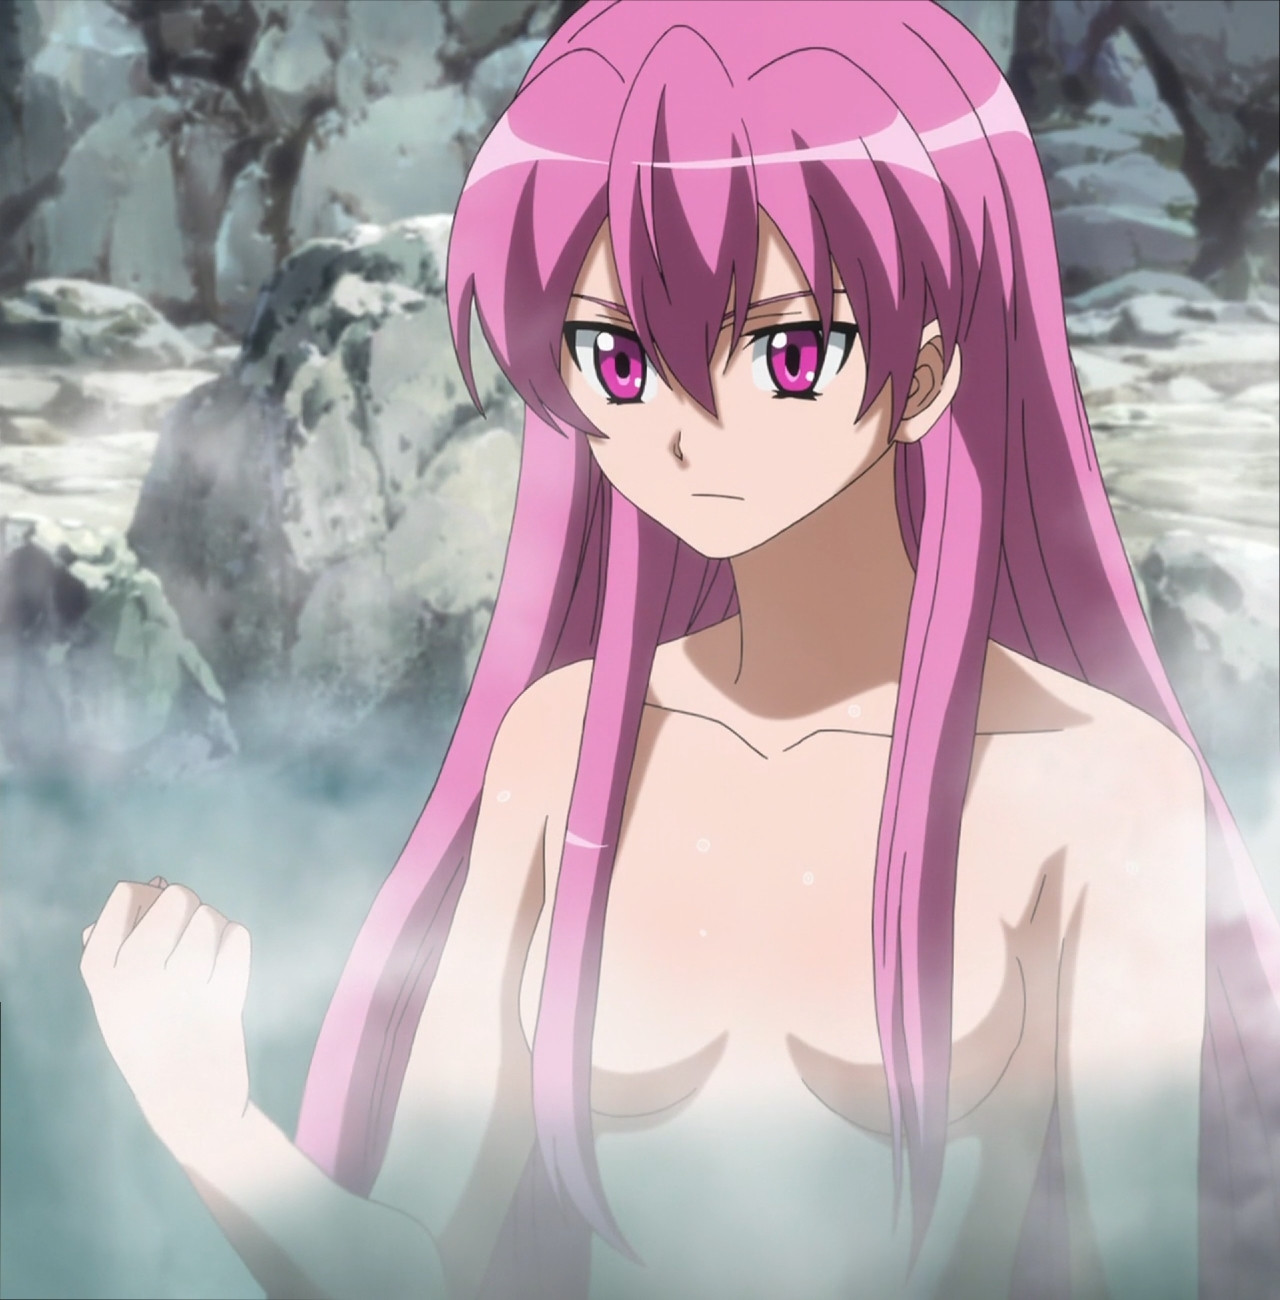 dave dowie recommends Akame Ga Kill Episode 9